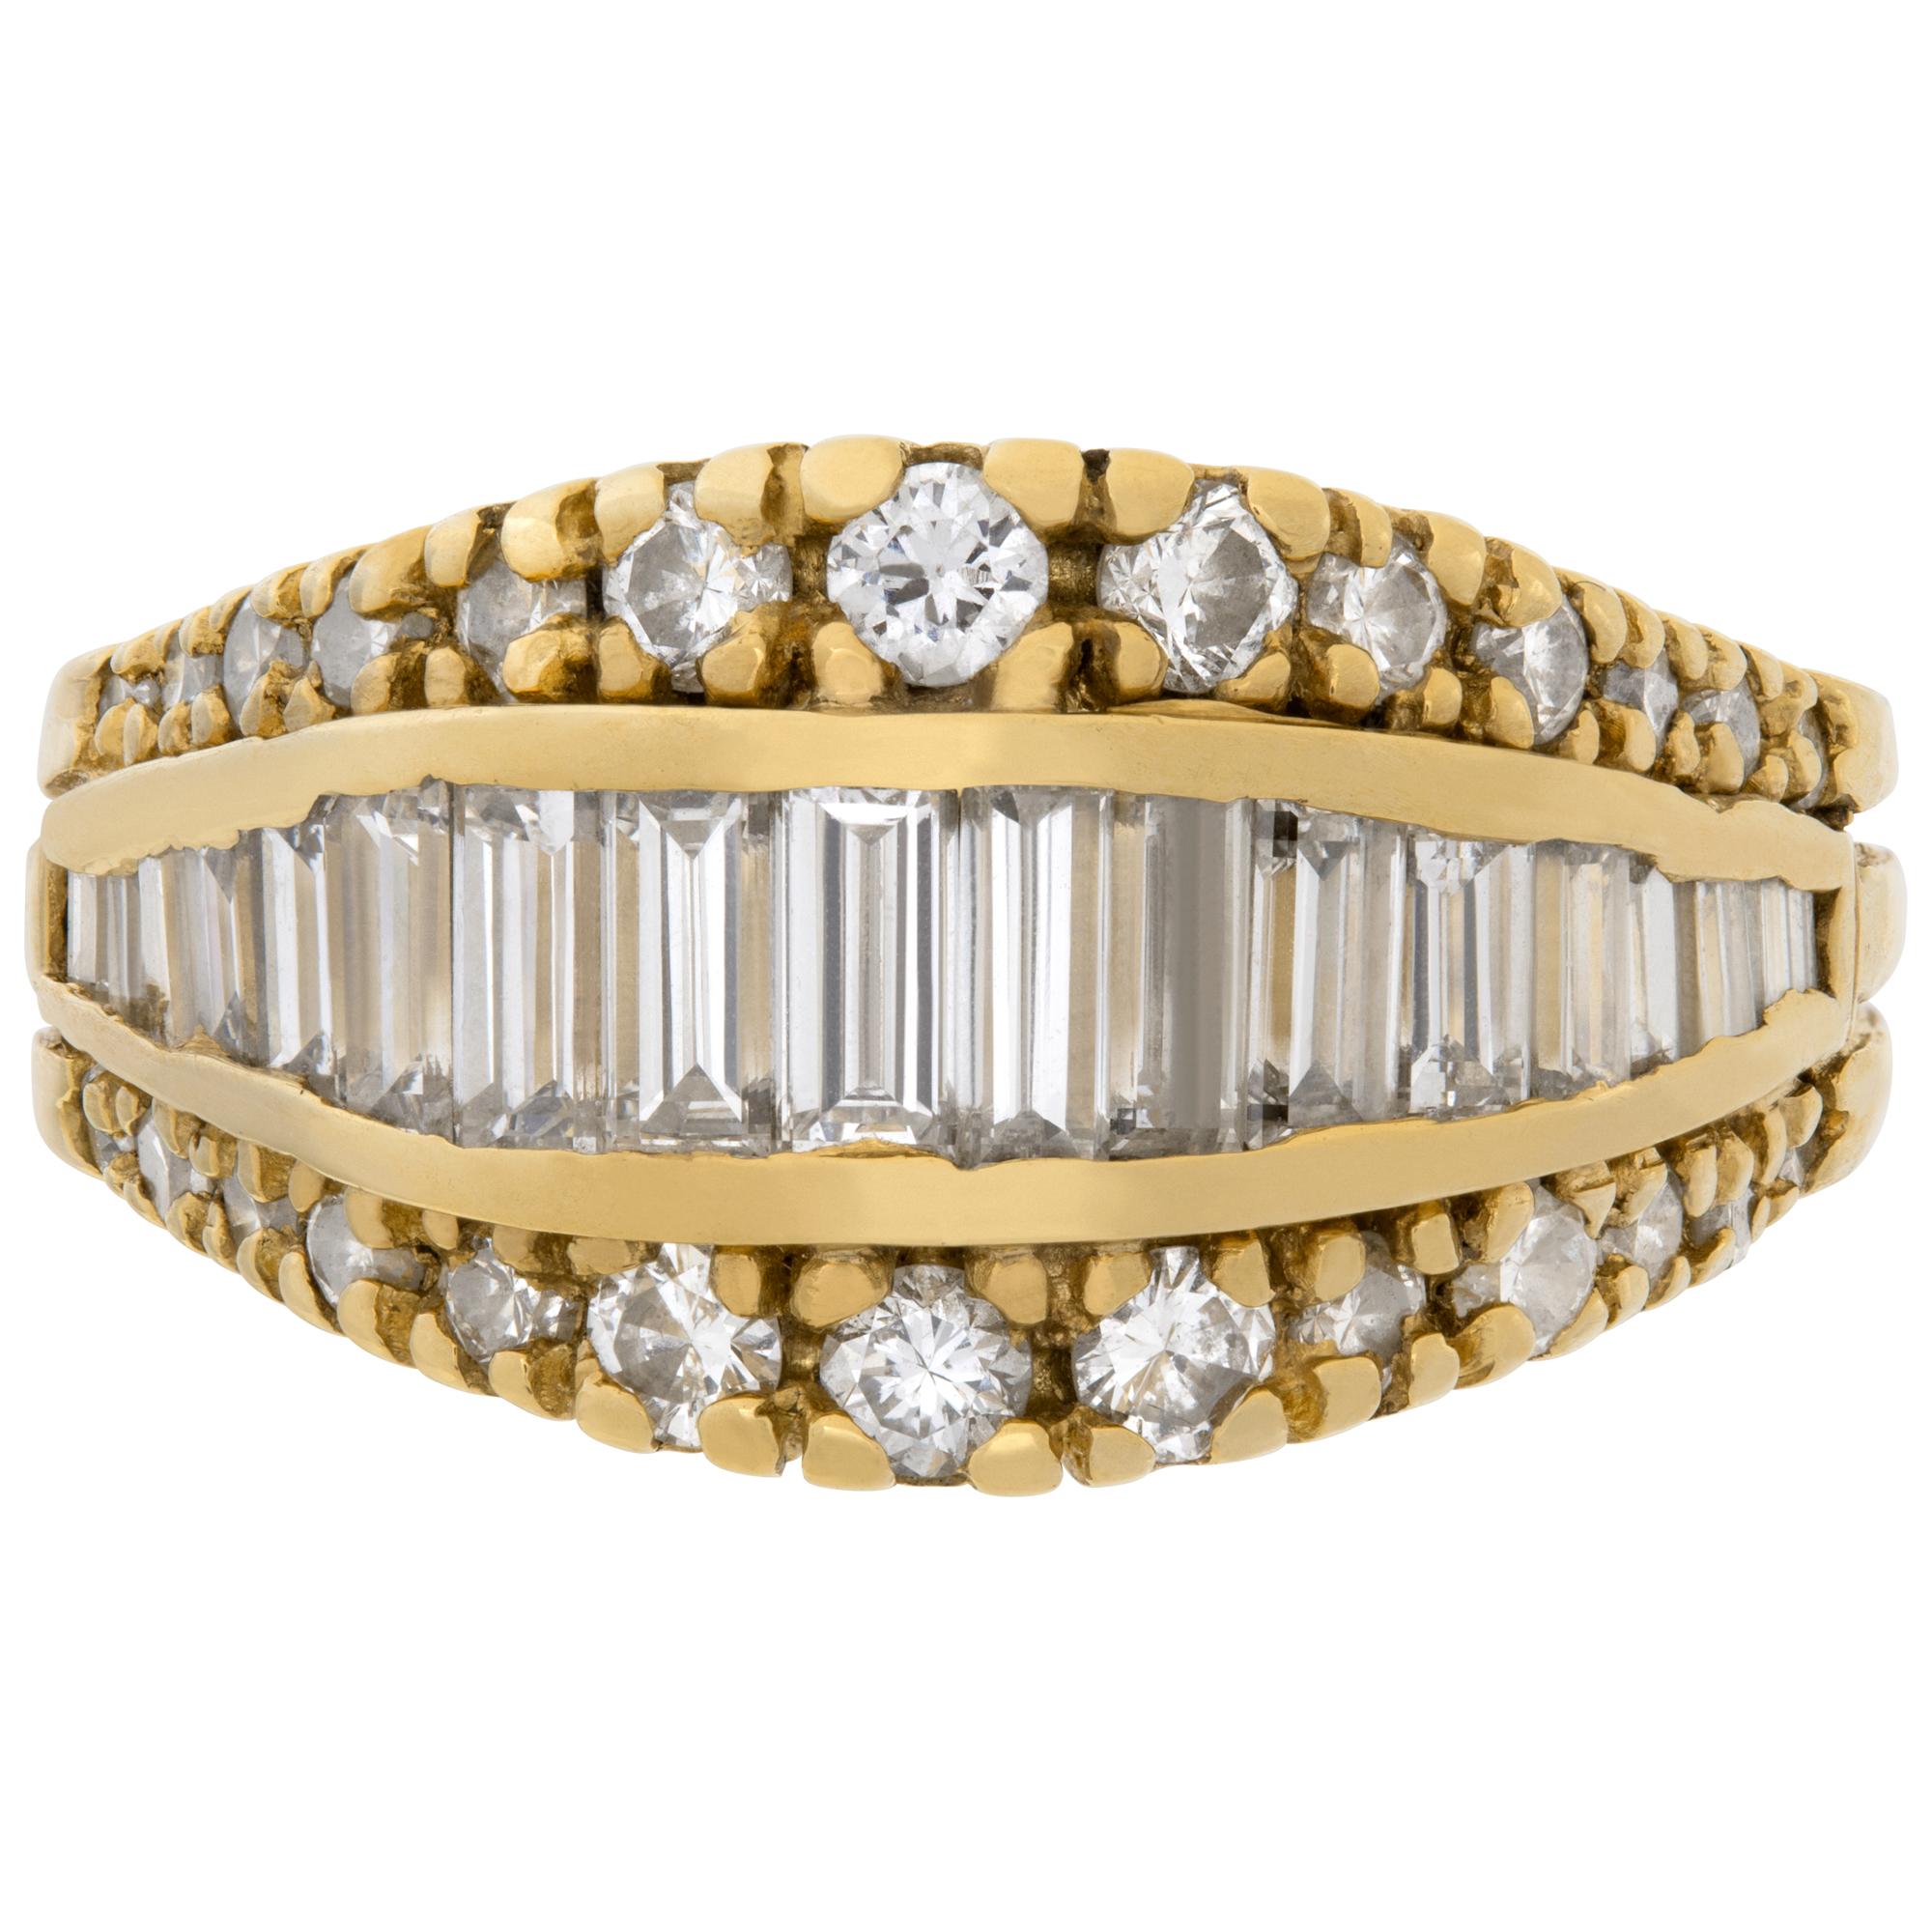 Diamond ring in 18k yellow gold with approx. 1.20 cts in round and baguette style white clean diamonds. Size 7. Ring has a very special look!This Diamond ring is currently size 7 and some items can be sized up or down, please ask! It weighs 5.2